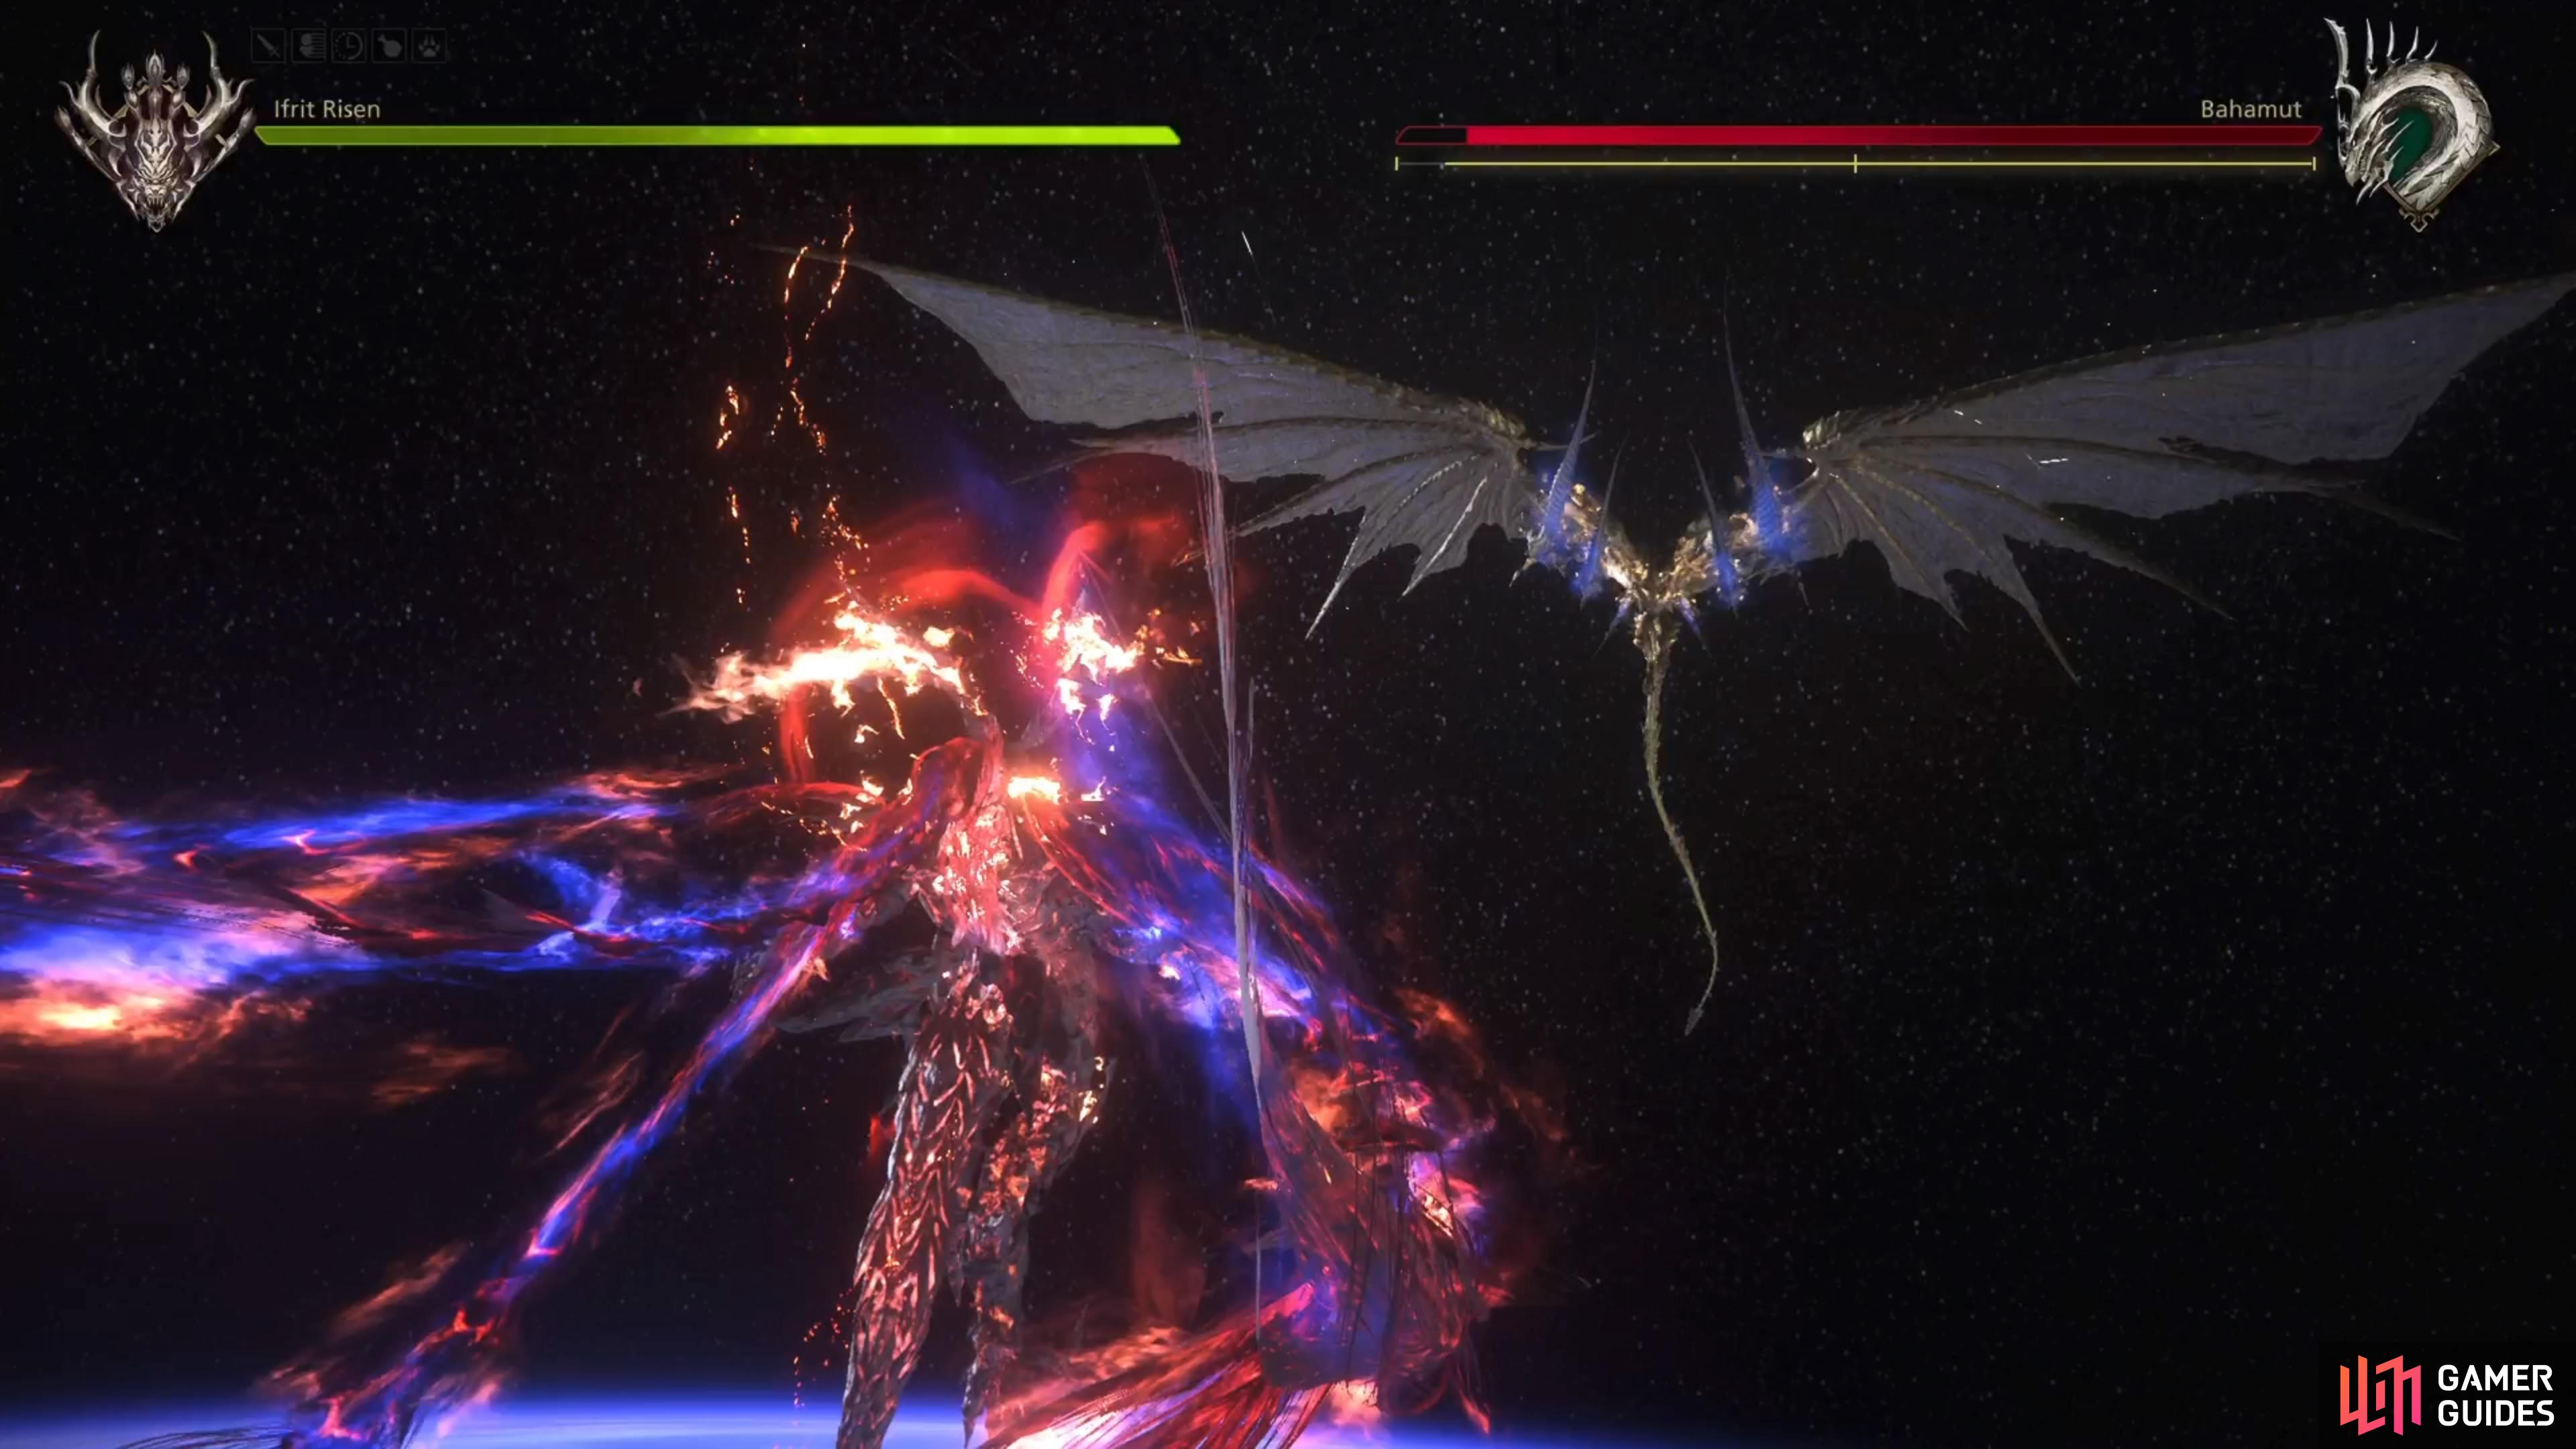 The second fight against Bahamut will immediately follow the first.